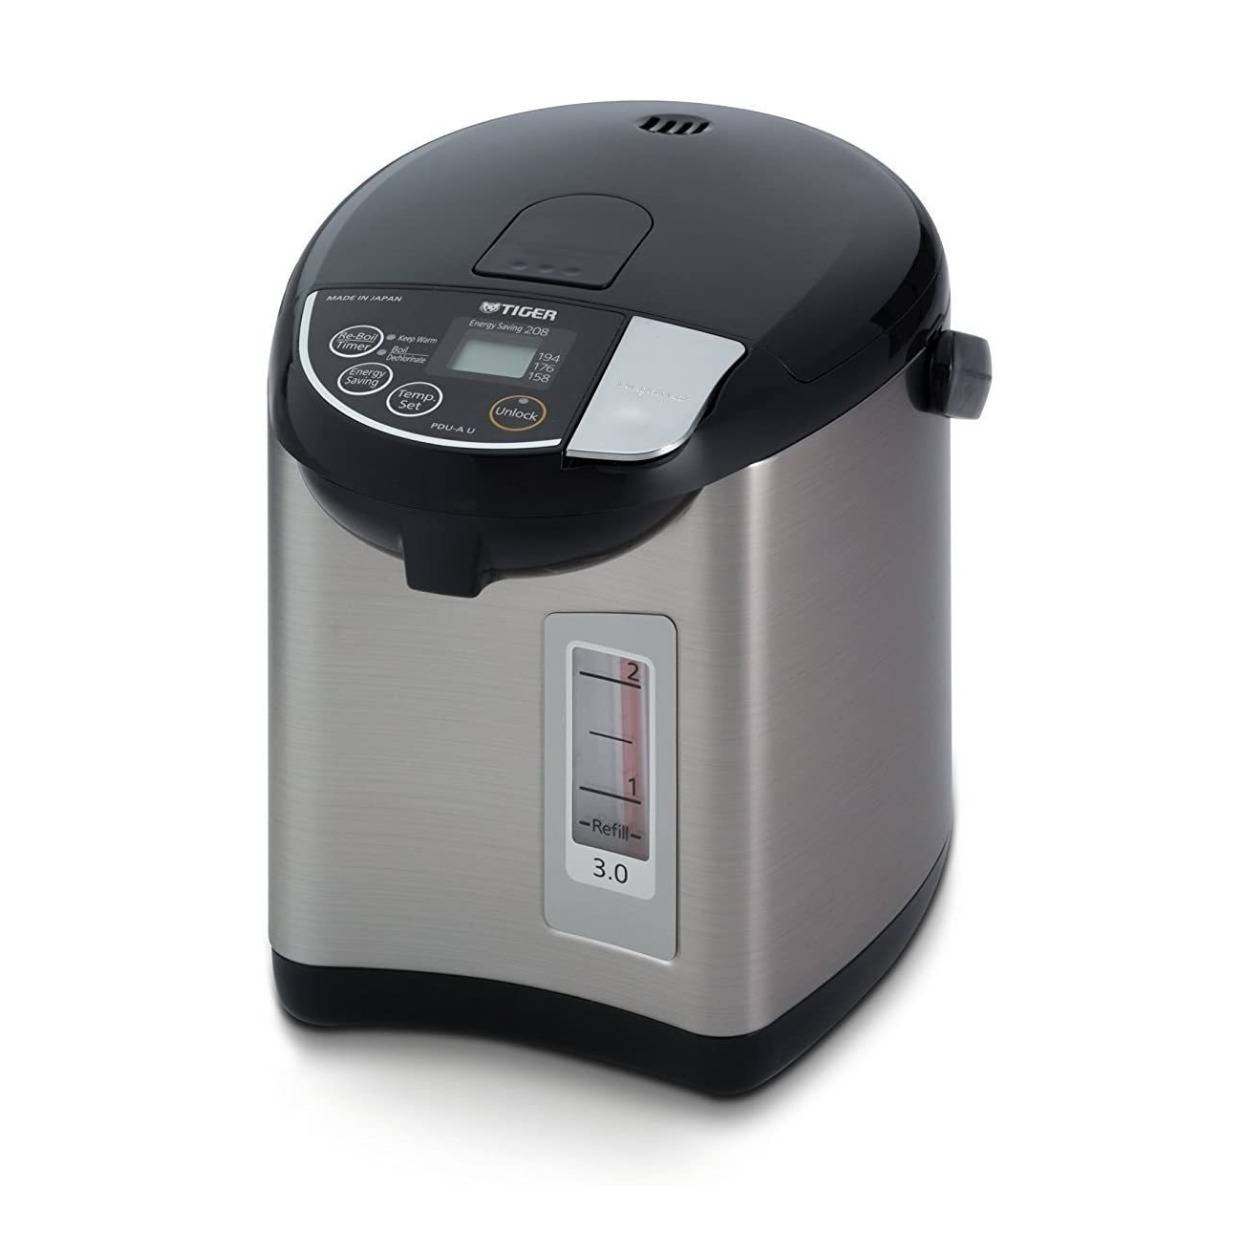 Tiger PDU-A30U 3-Liter Electric Hot Water Boiler and Warmer (Stainless Black)